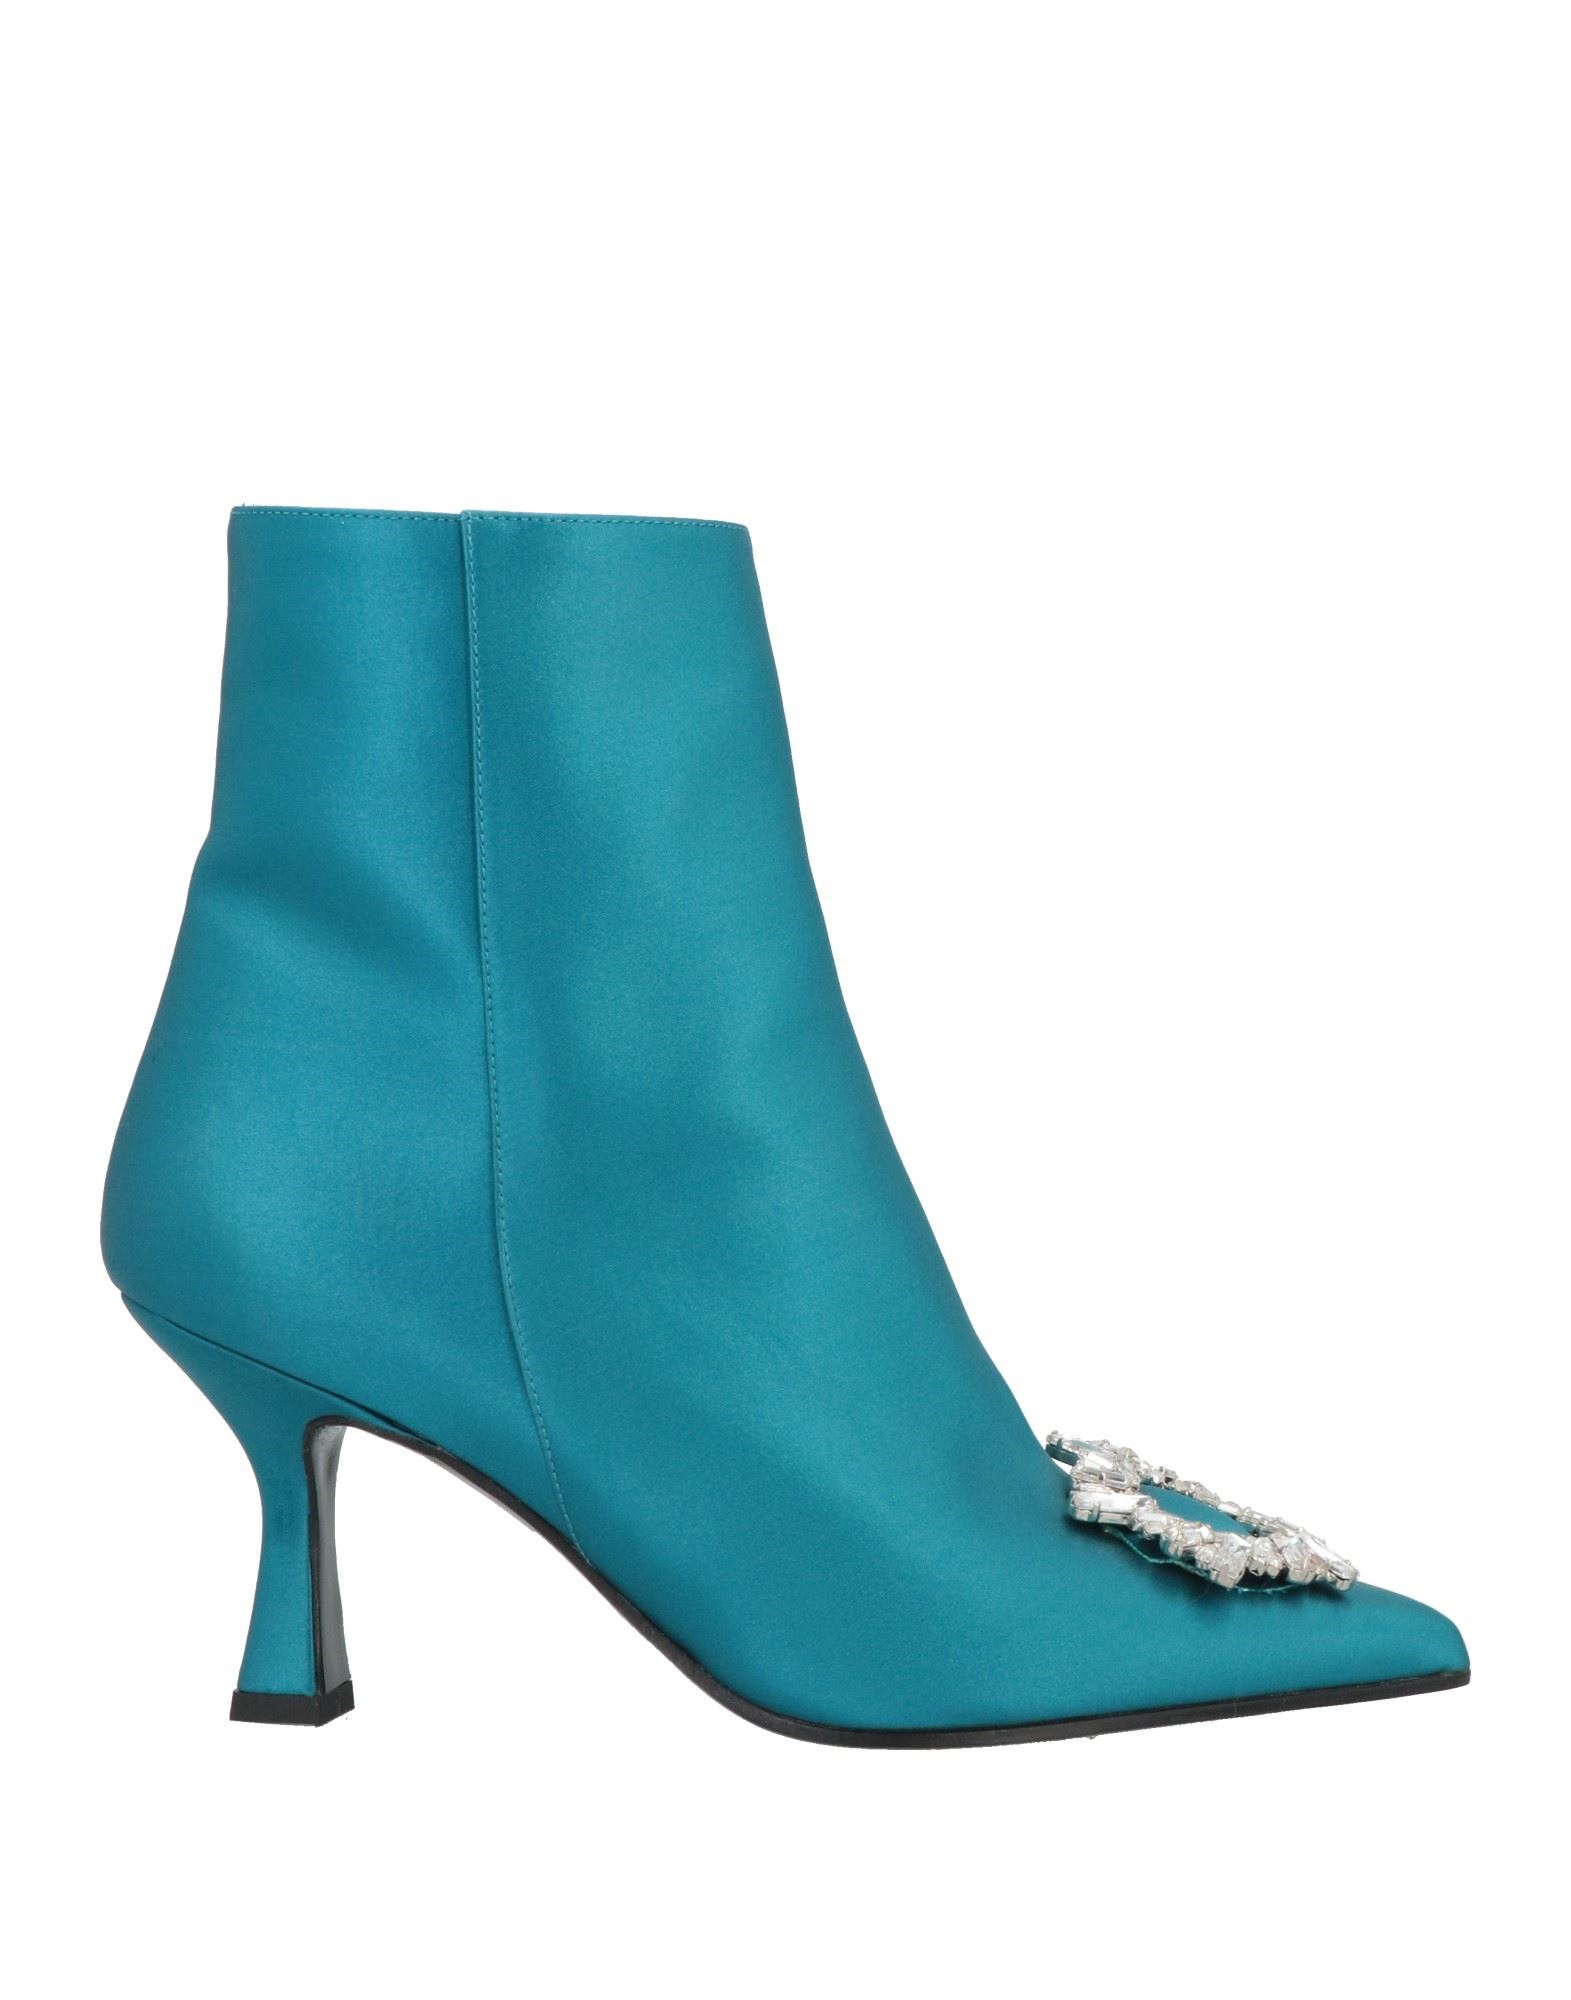 Aldo Castagna Ankle Boots In Turquoise